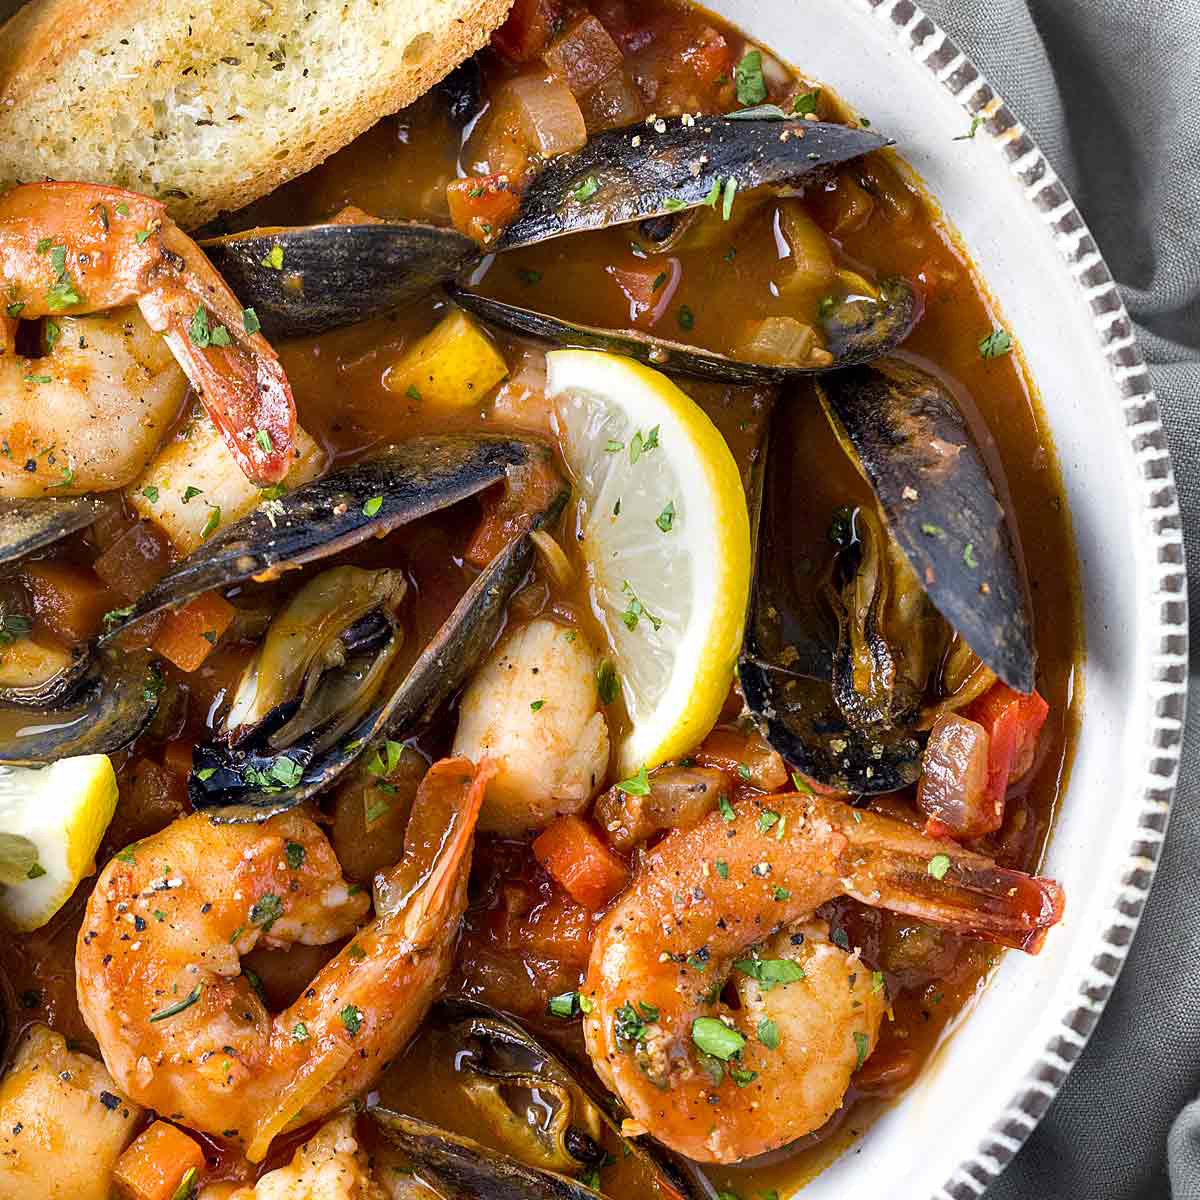 https://wholeyseafood.com/wp-content/uploads/2020/07/wholey_seafood_Cioppino_Style_Seafood_Stew-2.jpg